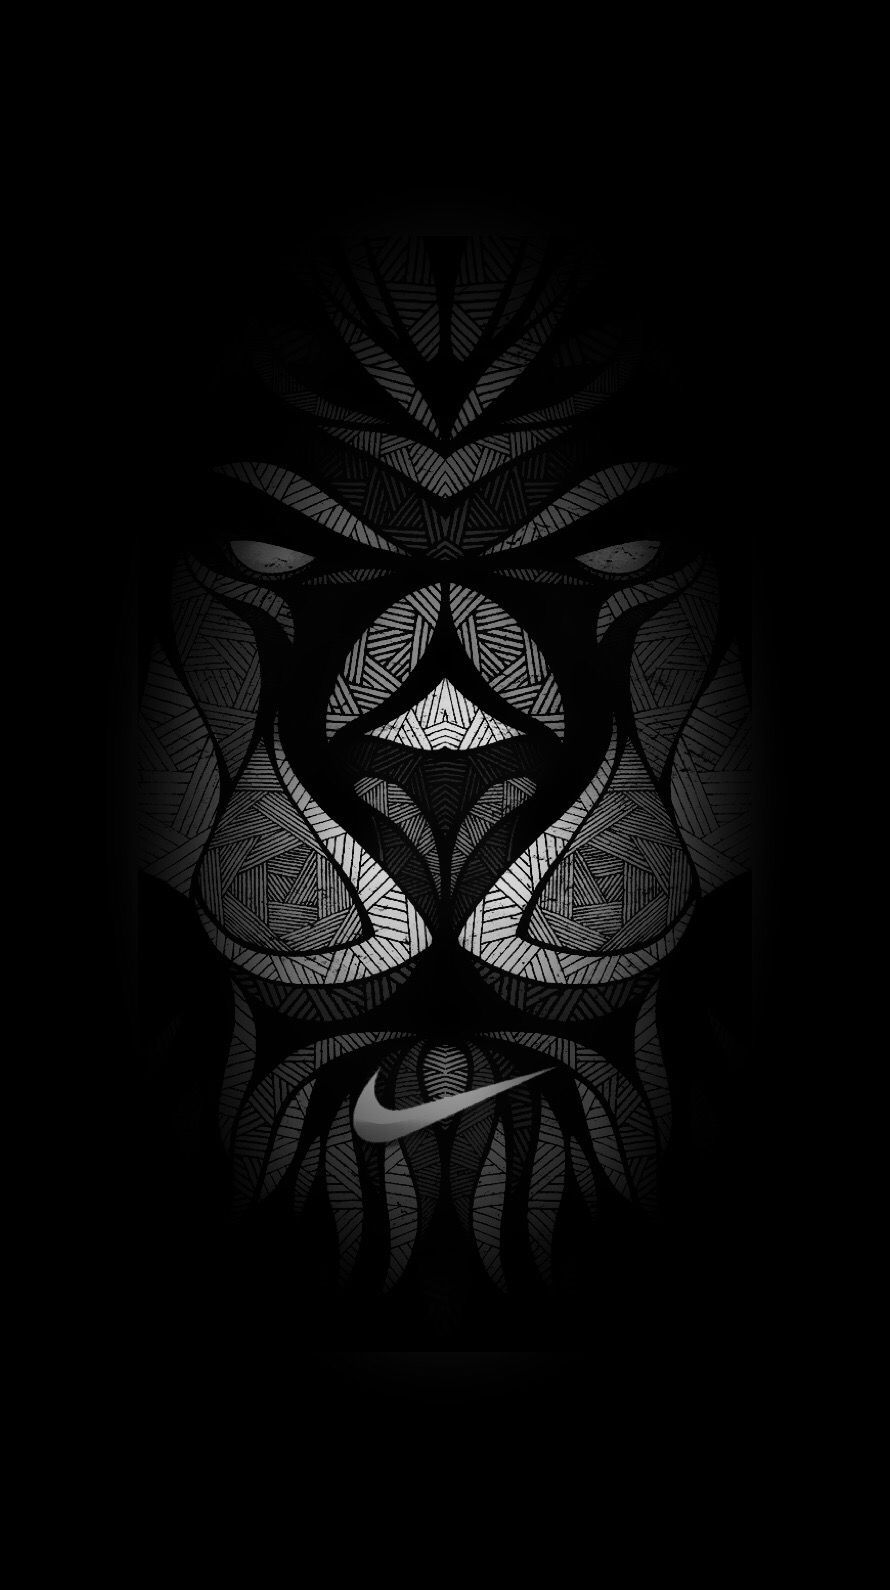 Lebron James Logo Black And White Wallpapers - Wallpaper Cave